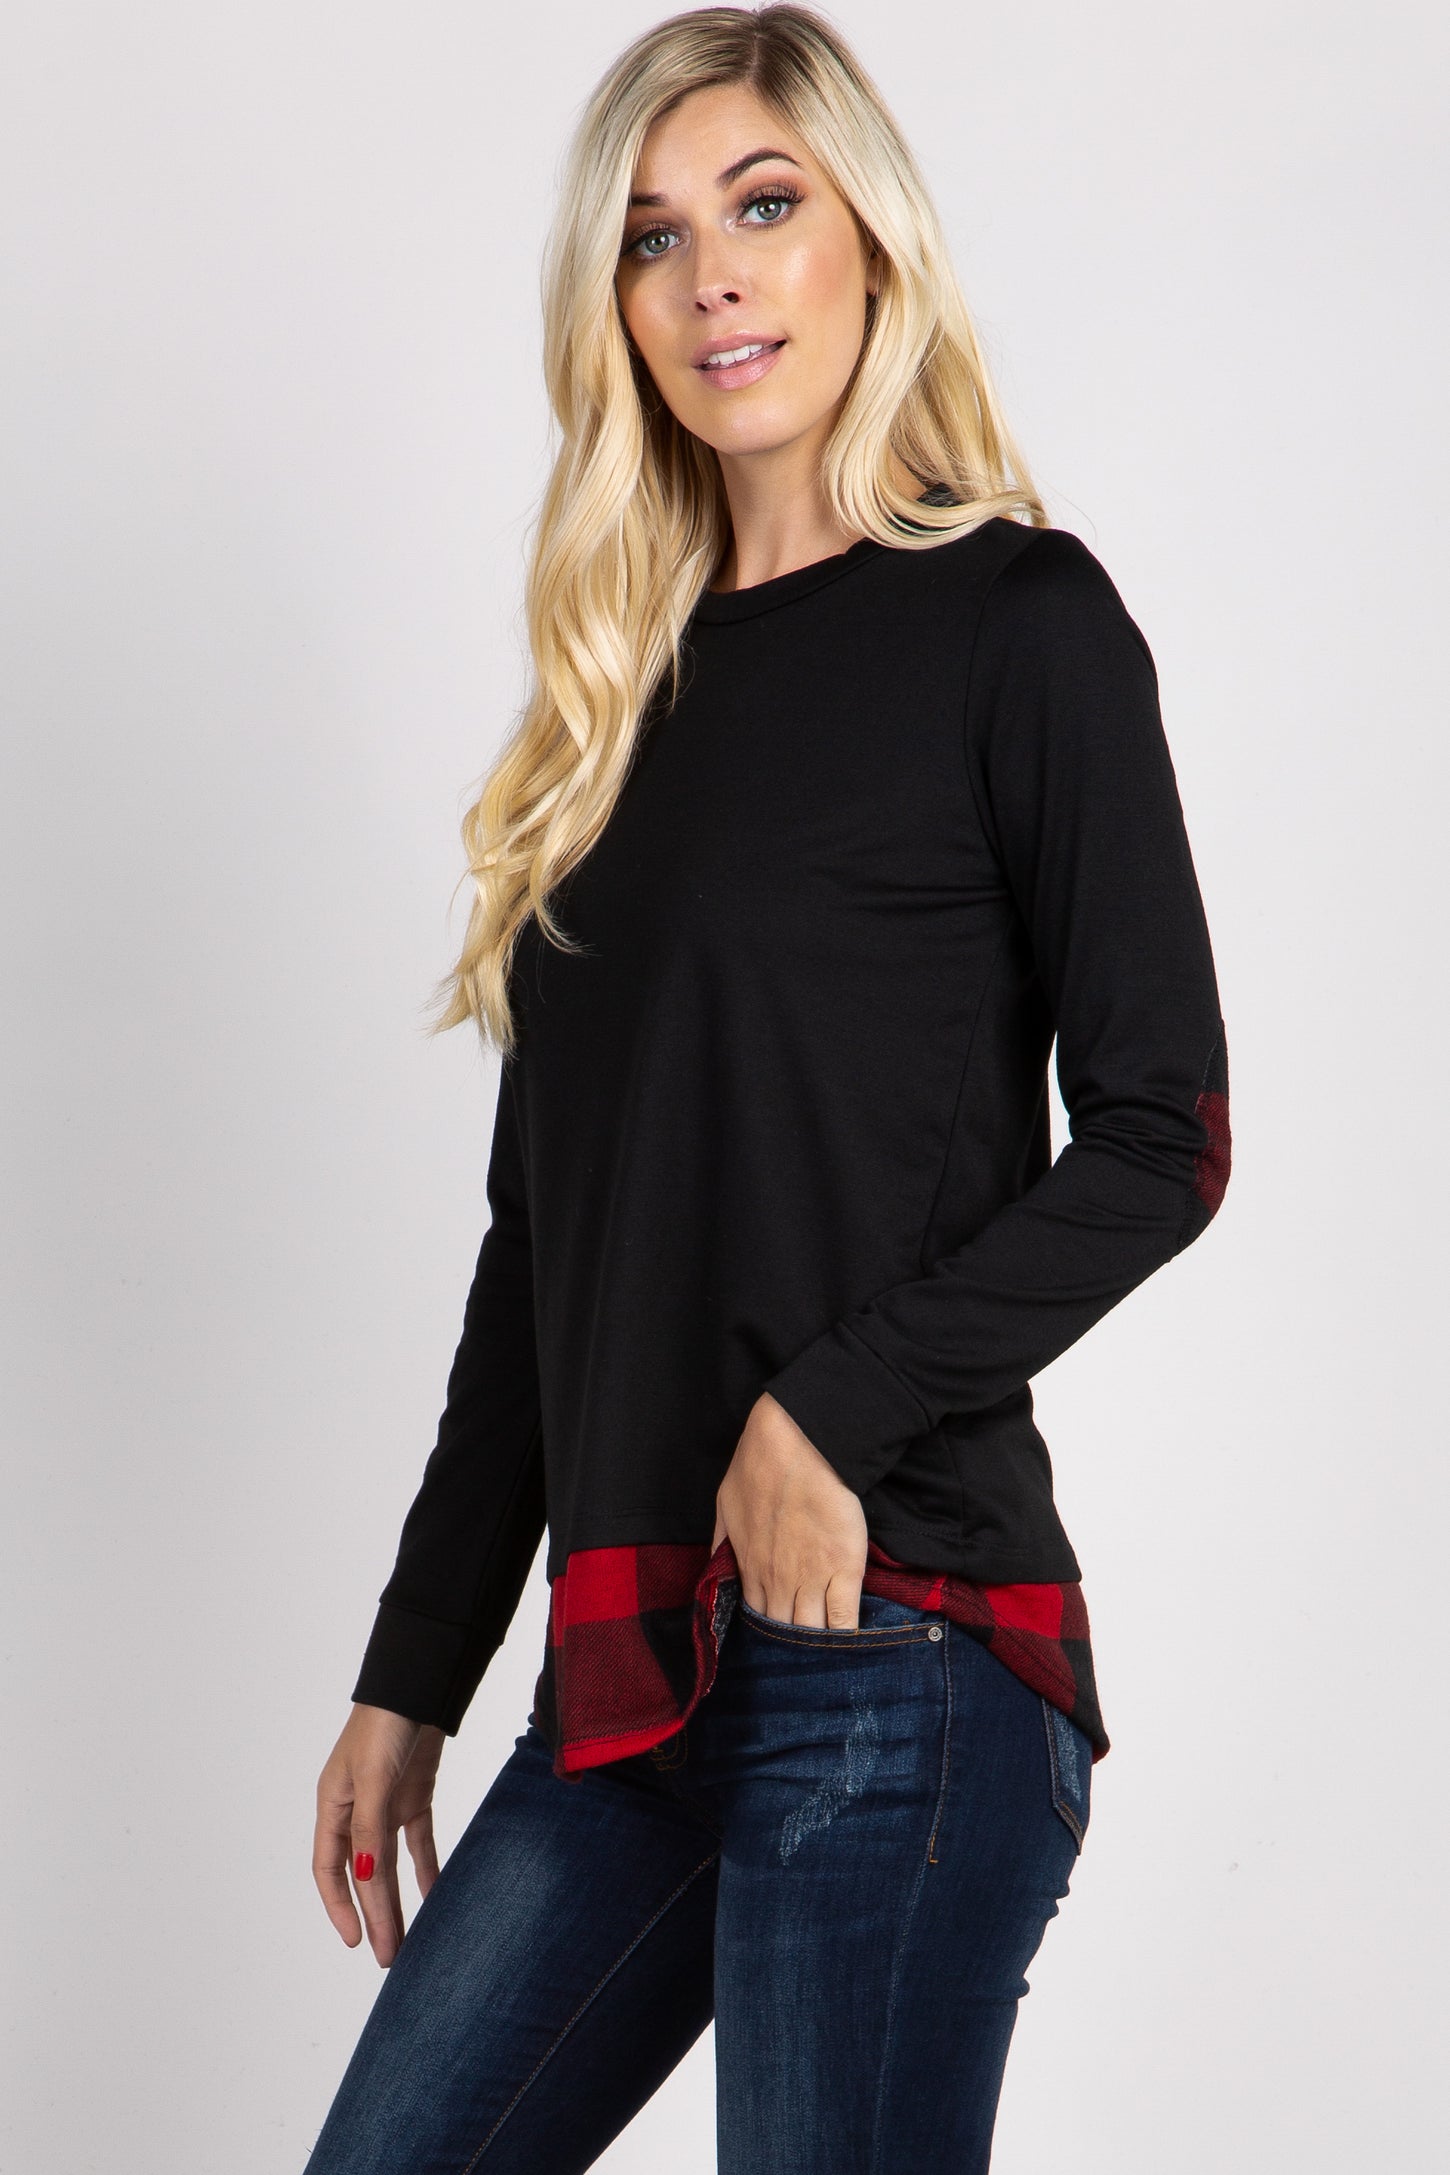 PinkBlush Black Solid Plaid Accent Long Sleeve Top